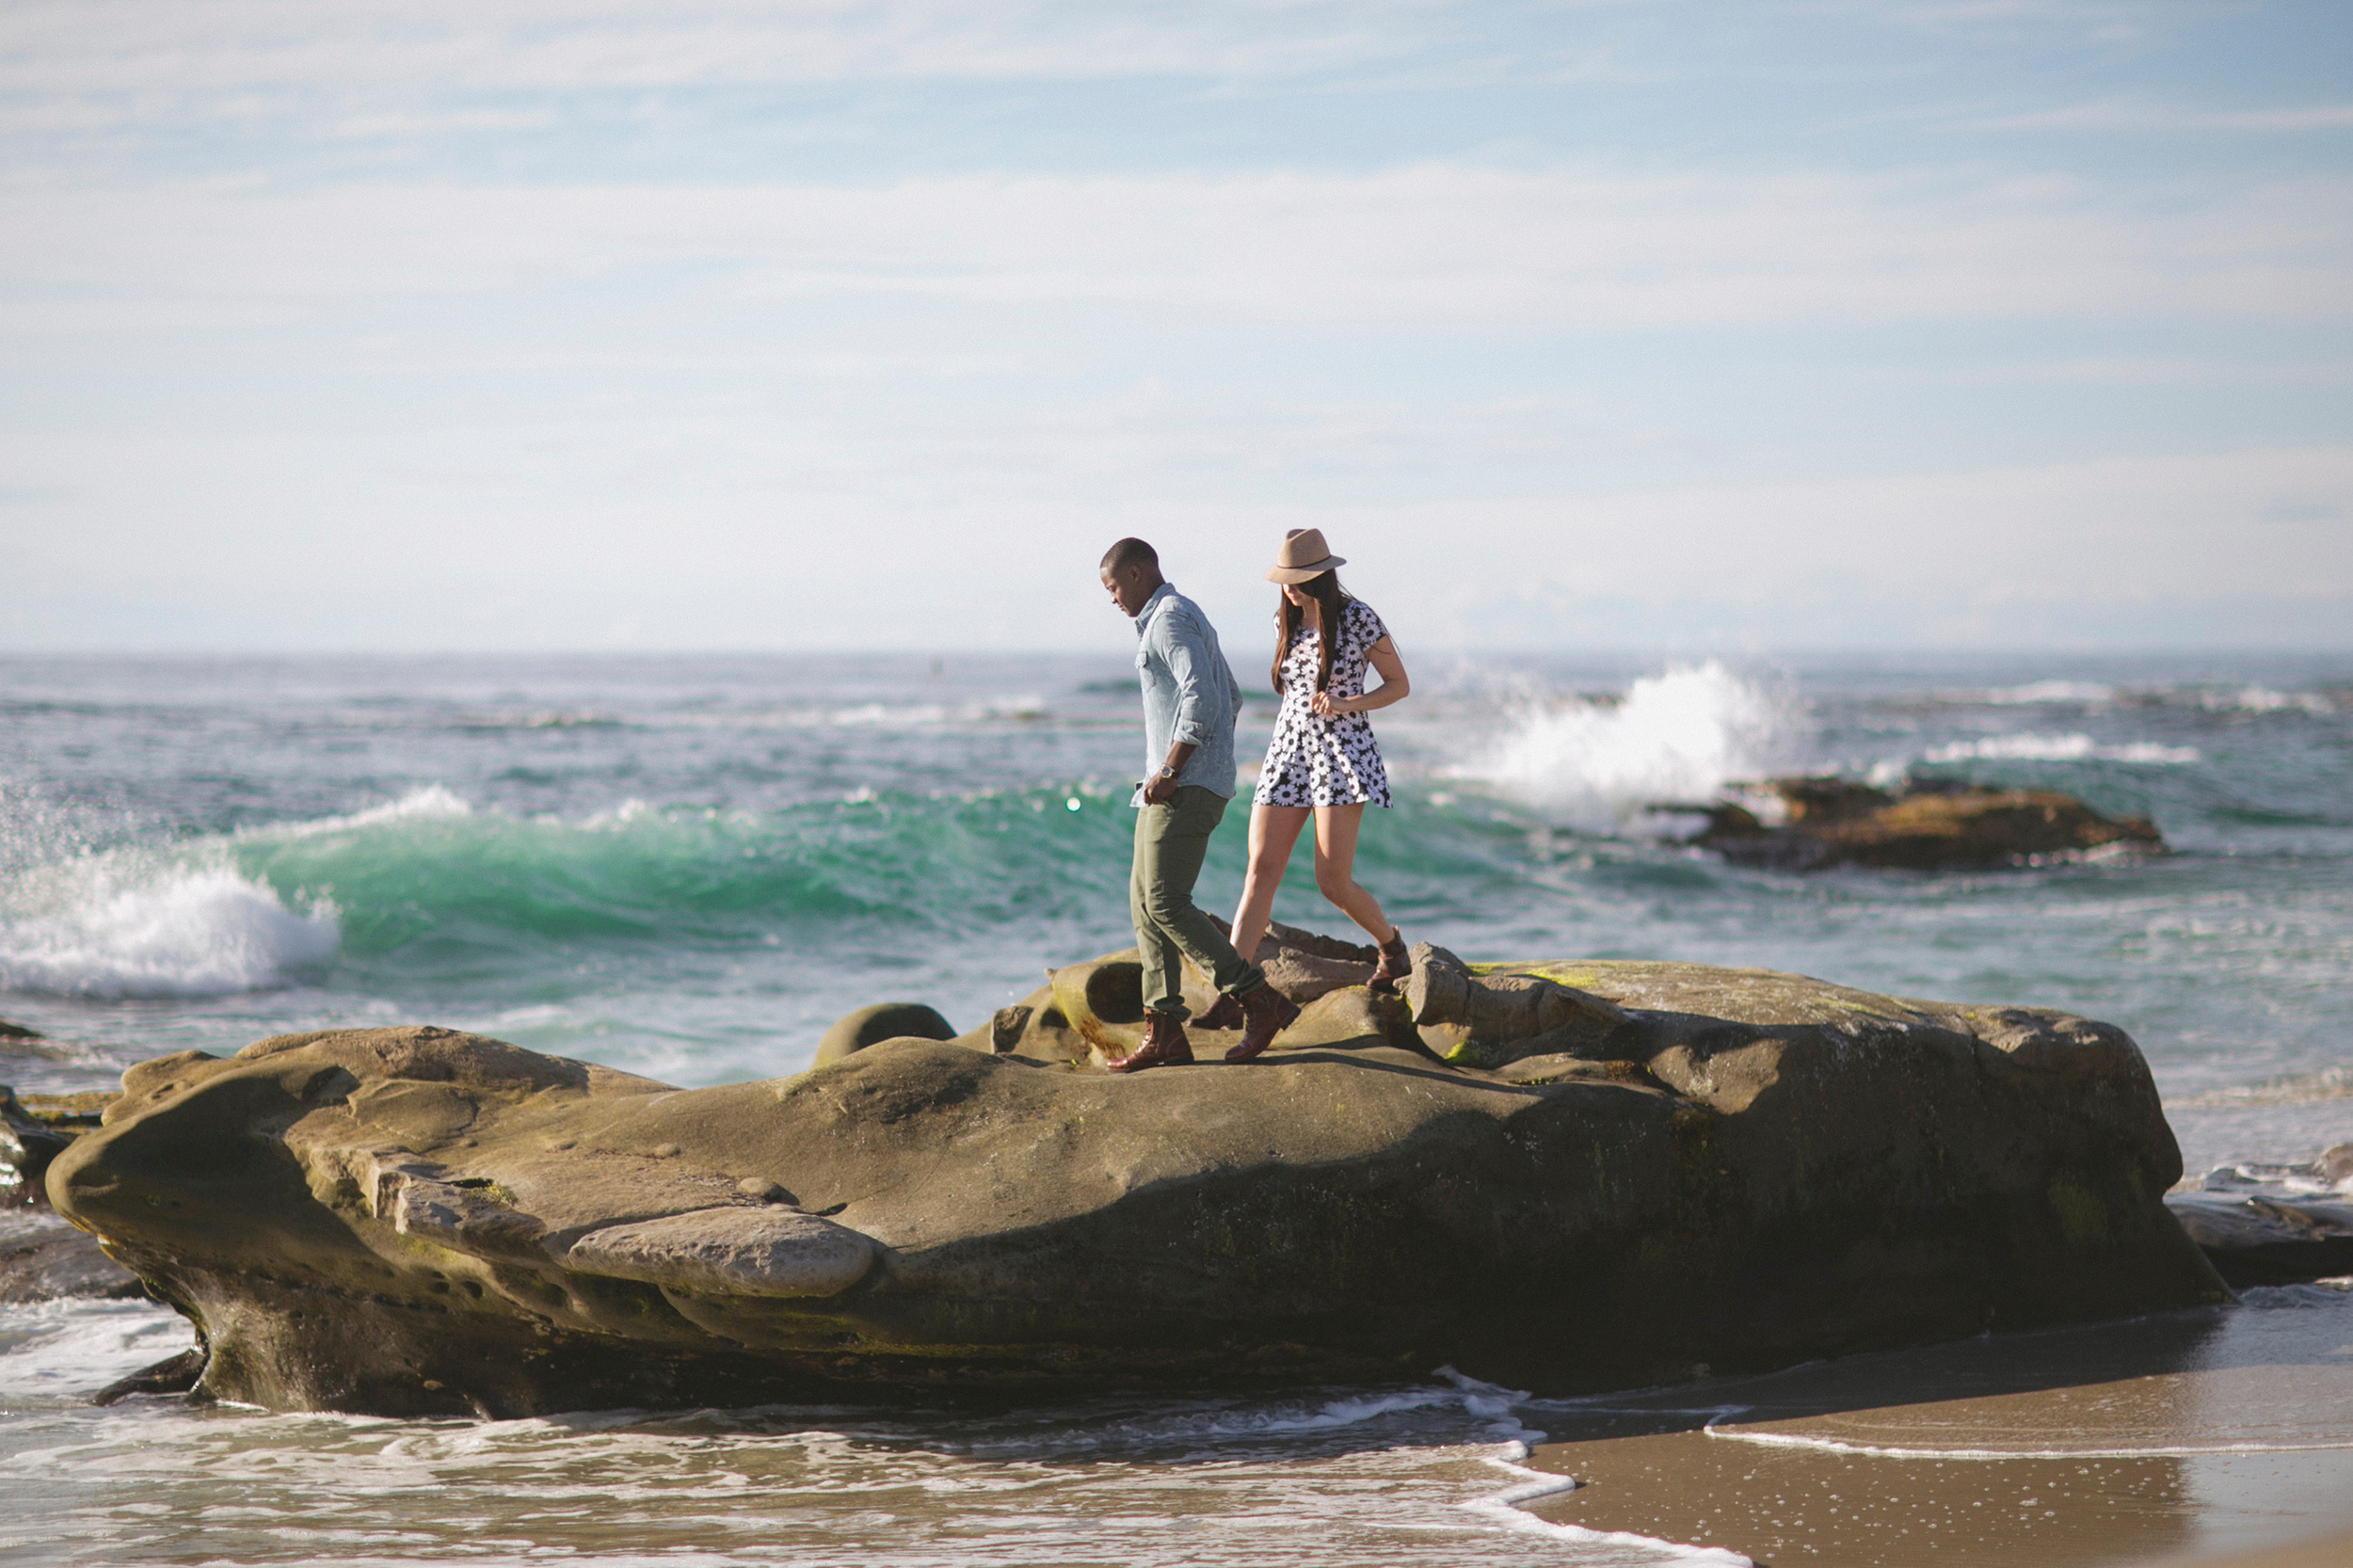 Colby-and-Jess-Adventure-Engagement-Photography-Torrey-Pines-La-Jolla-California55.jpg